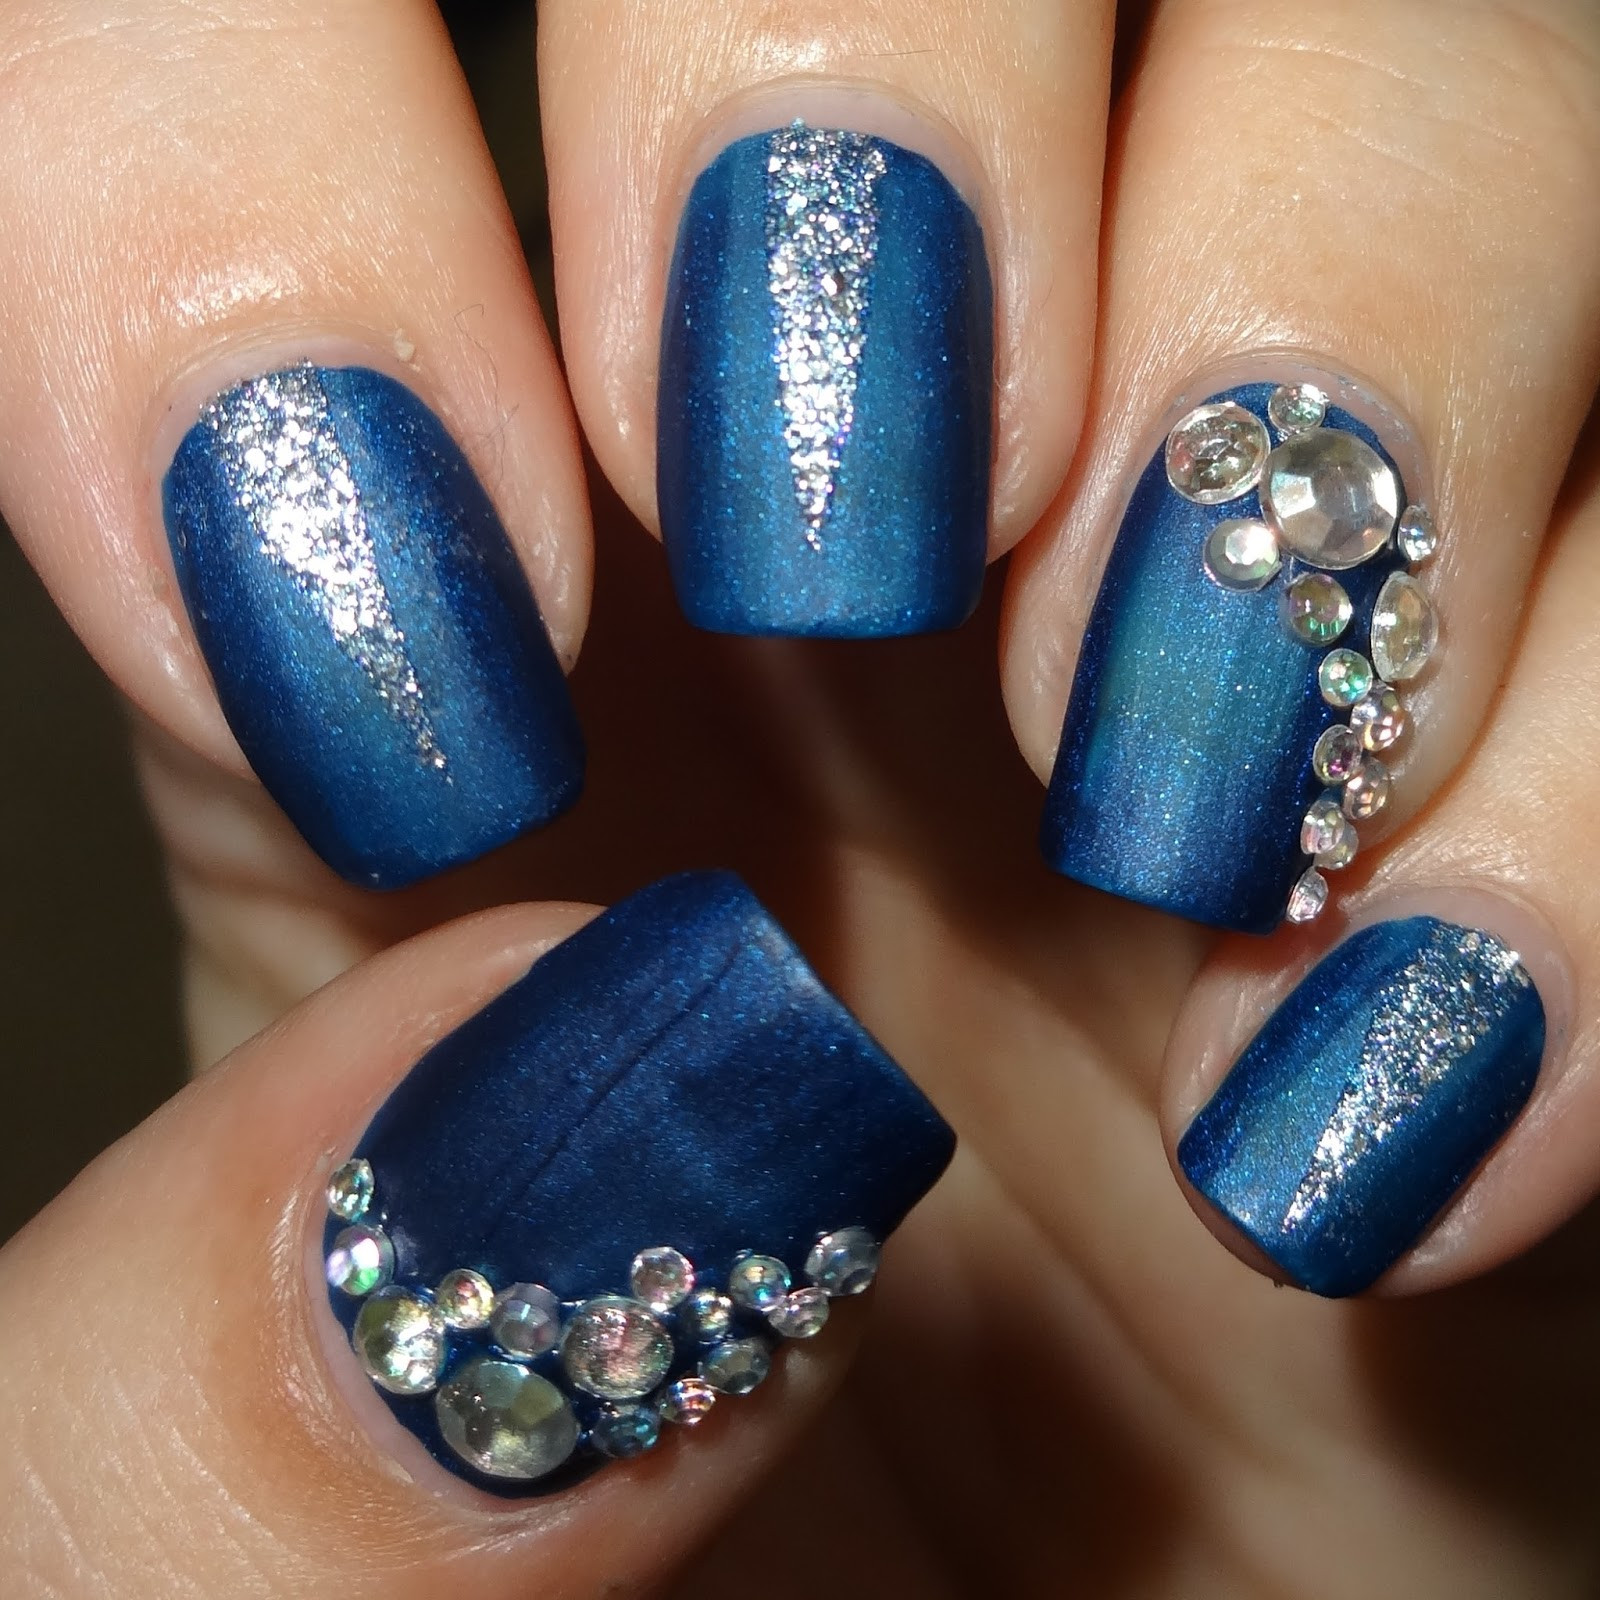 Nail Art With Gems
 Wendy s Delights Blue & Silver Mani using 3D Nail Art